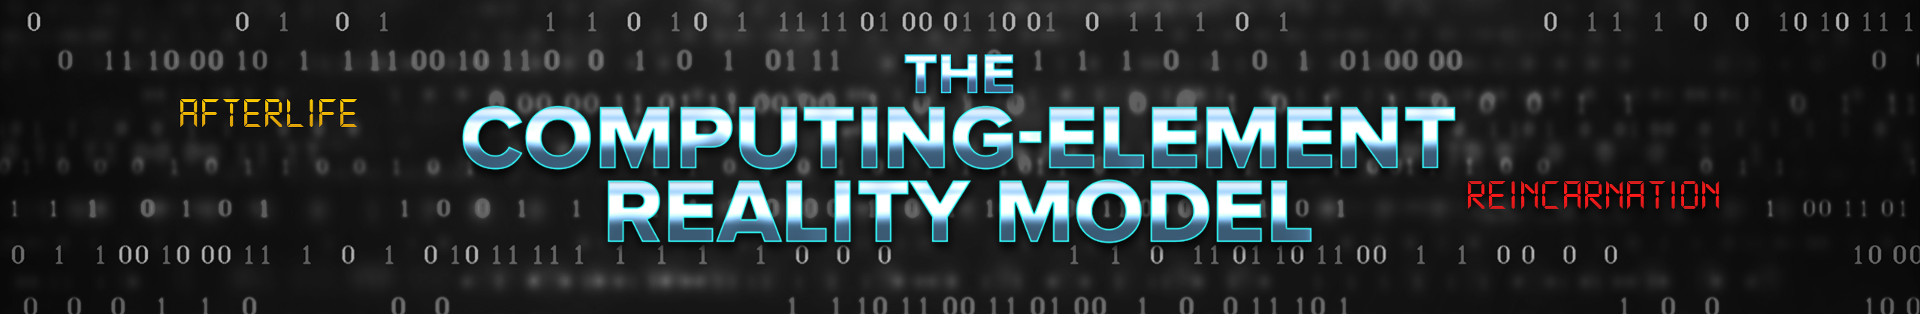 website image: The Computing-Element Reality Model, afterlife and reincarnation